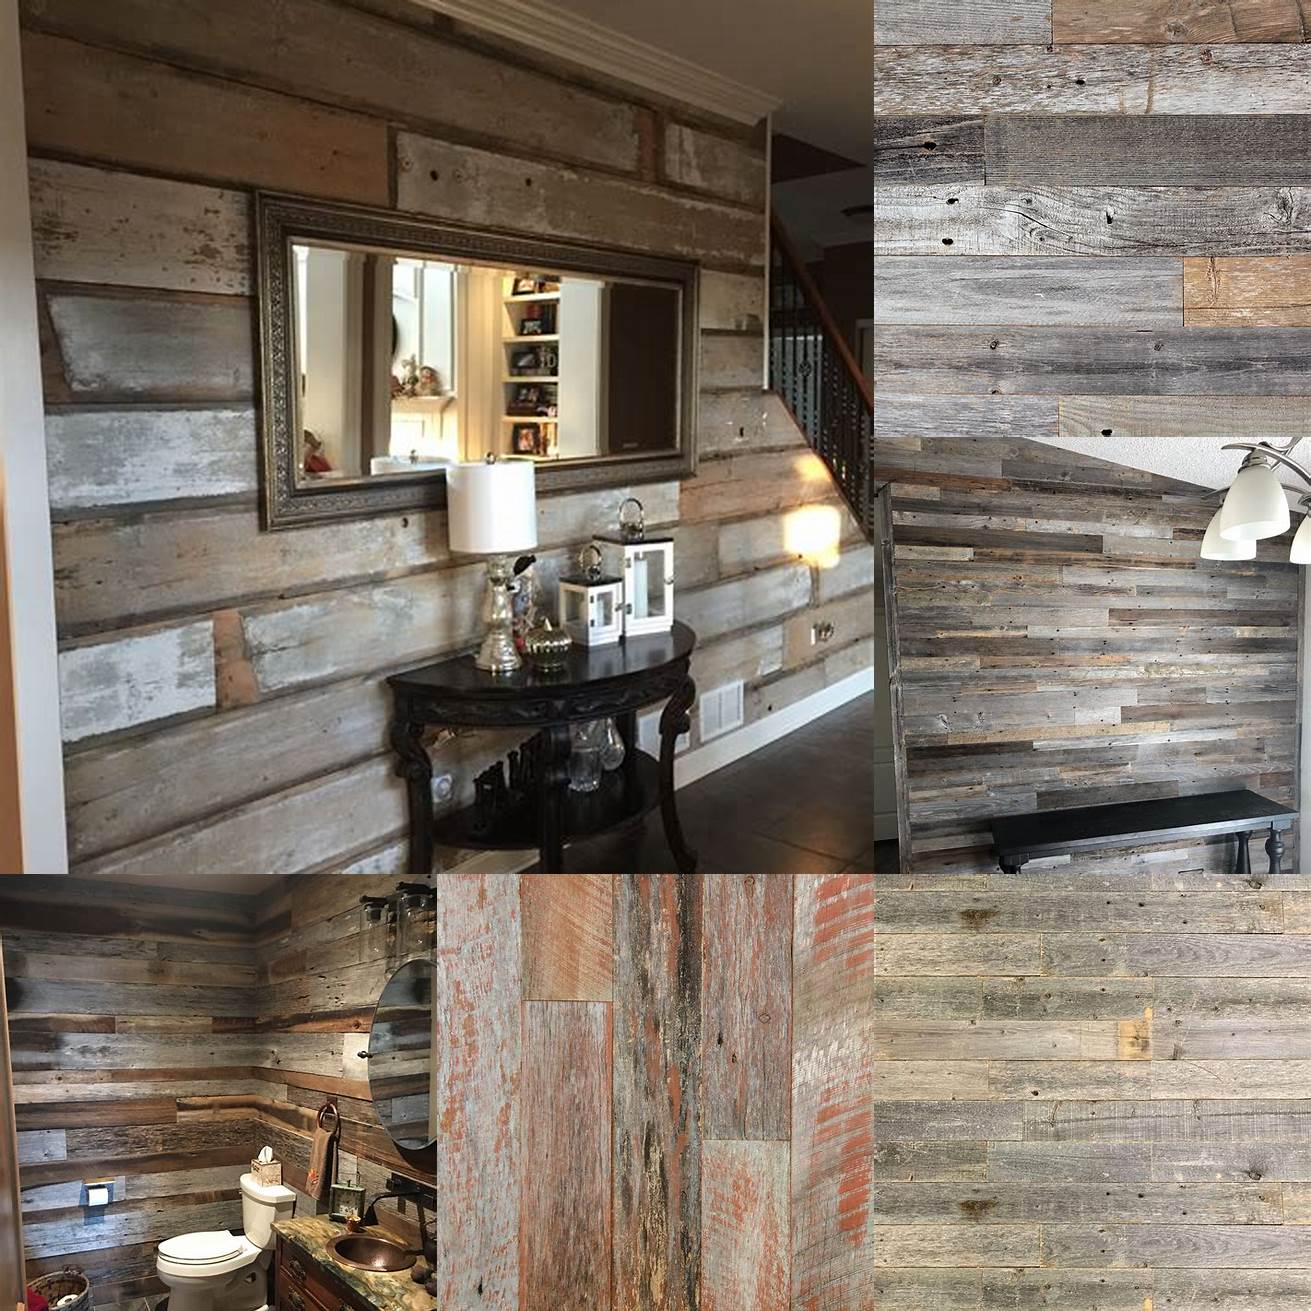 Barnwood This is wood that has been weathered by exposure to the elements Barnwood has a rustic aged look that can add a lot of charm to a bathroom